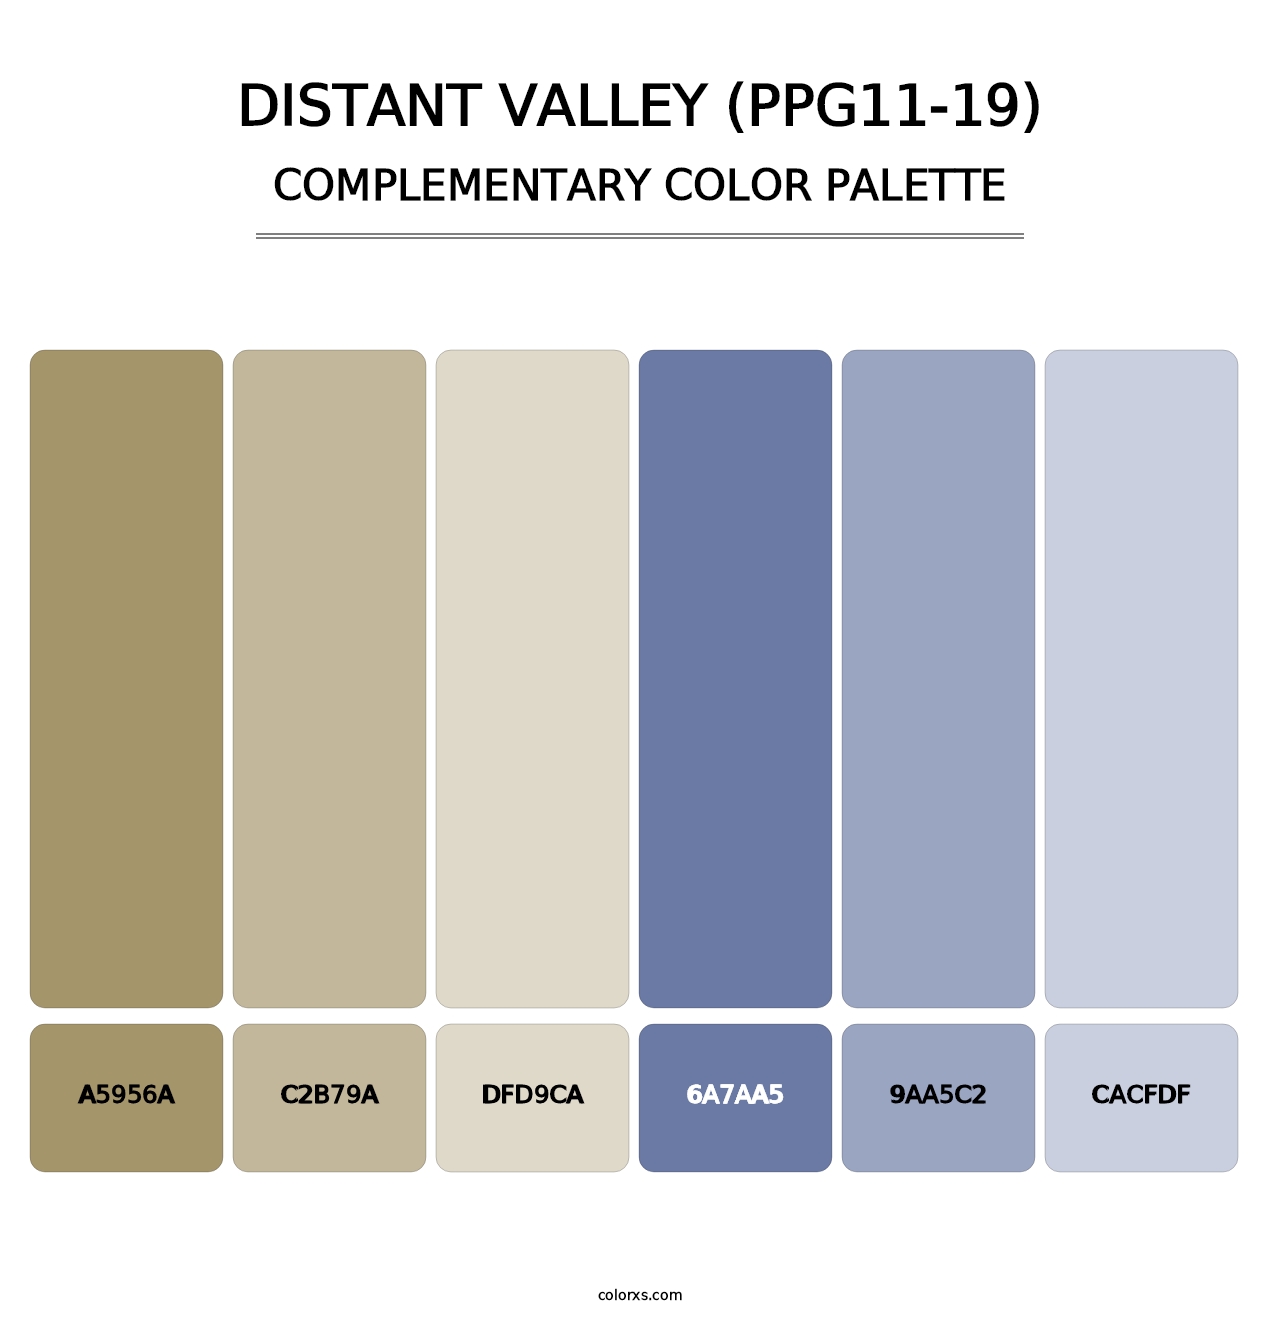 Distant Valley (PPG11-19) - Complementary Color Palette